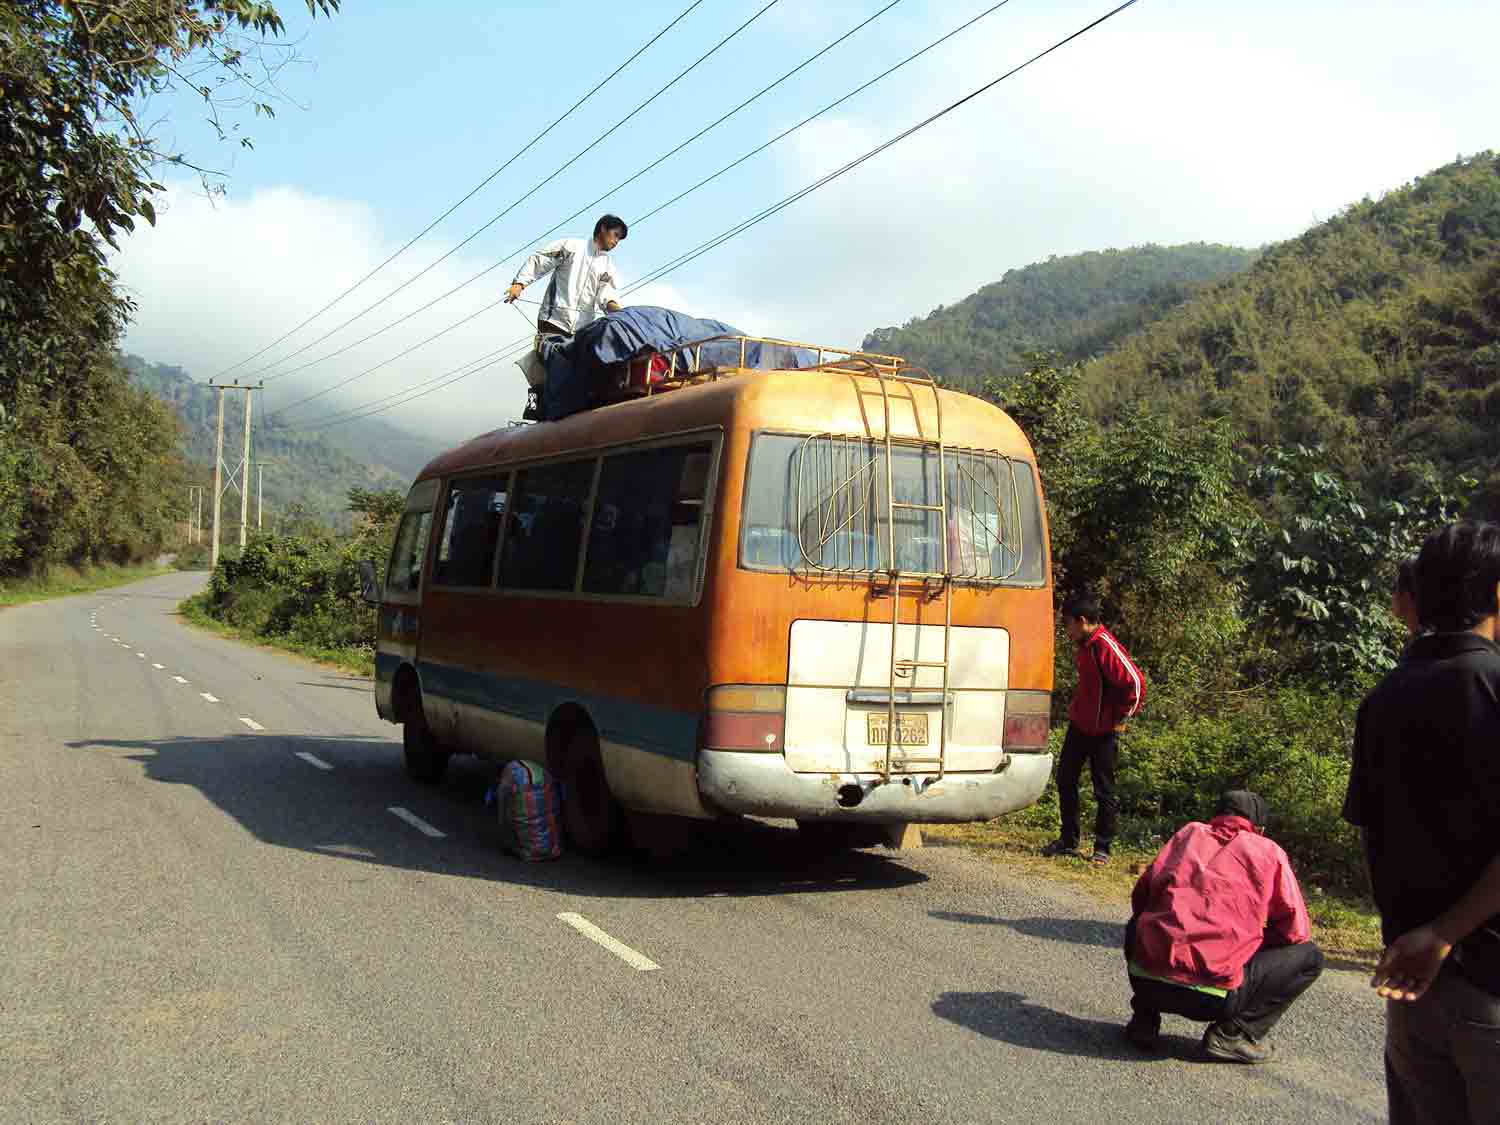 The bus loses luggage